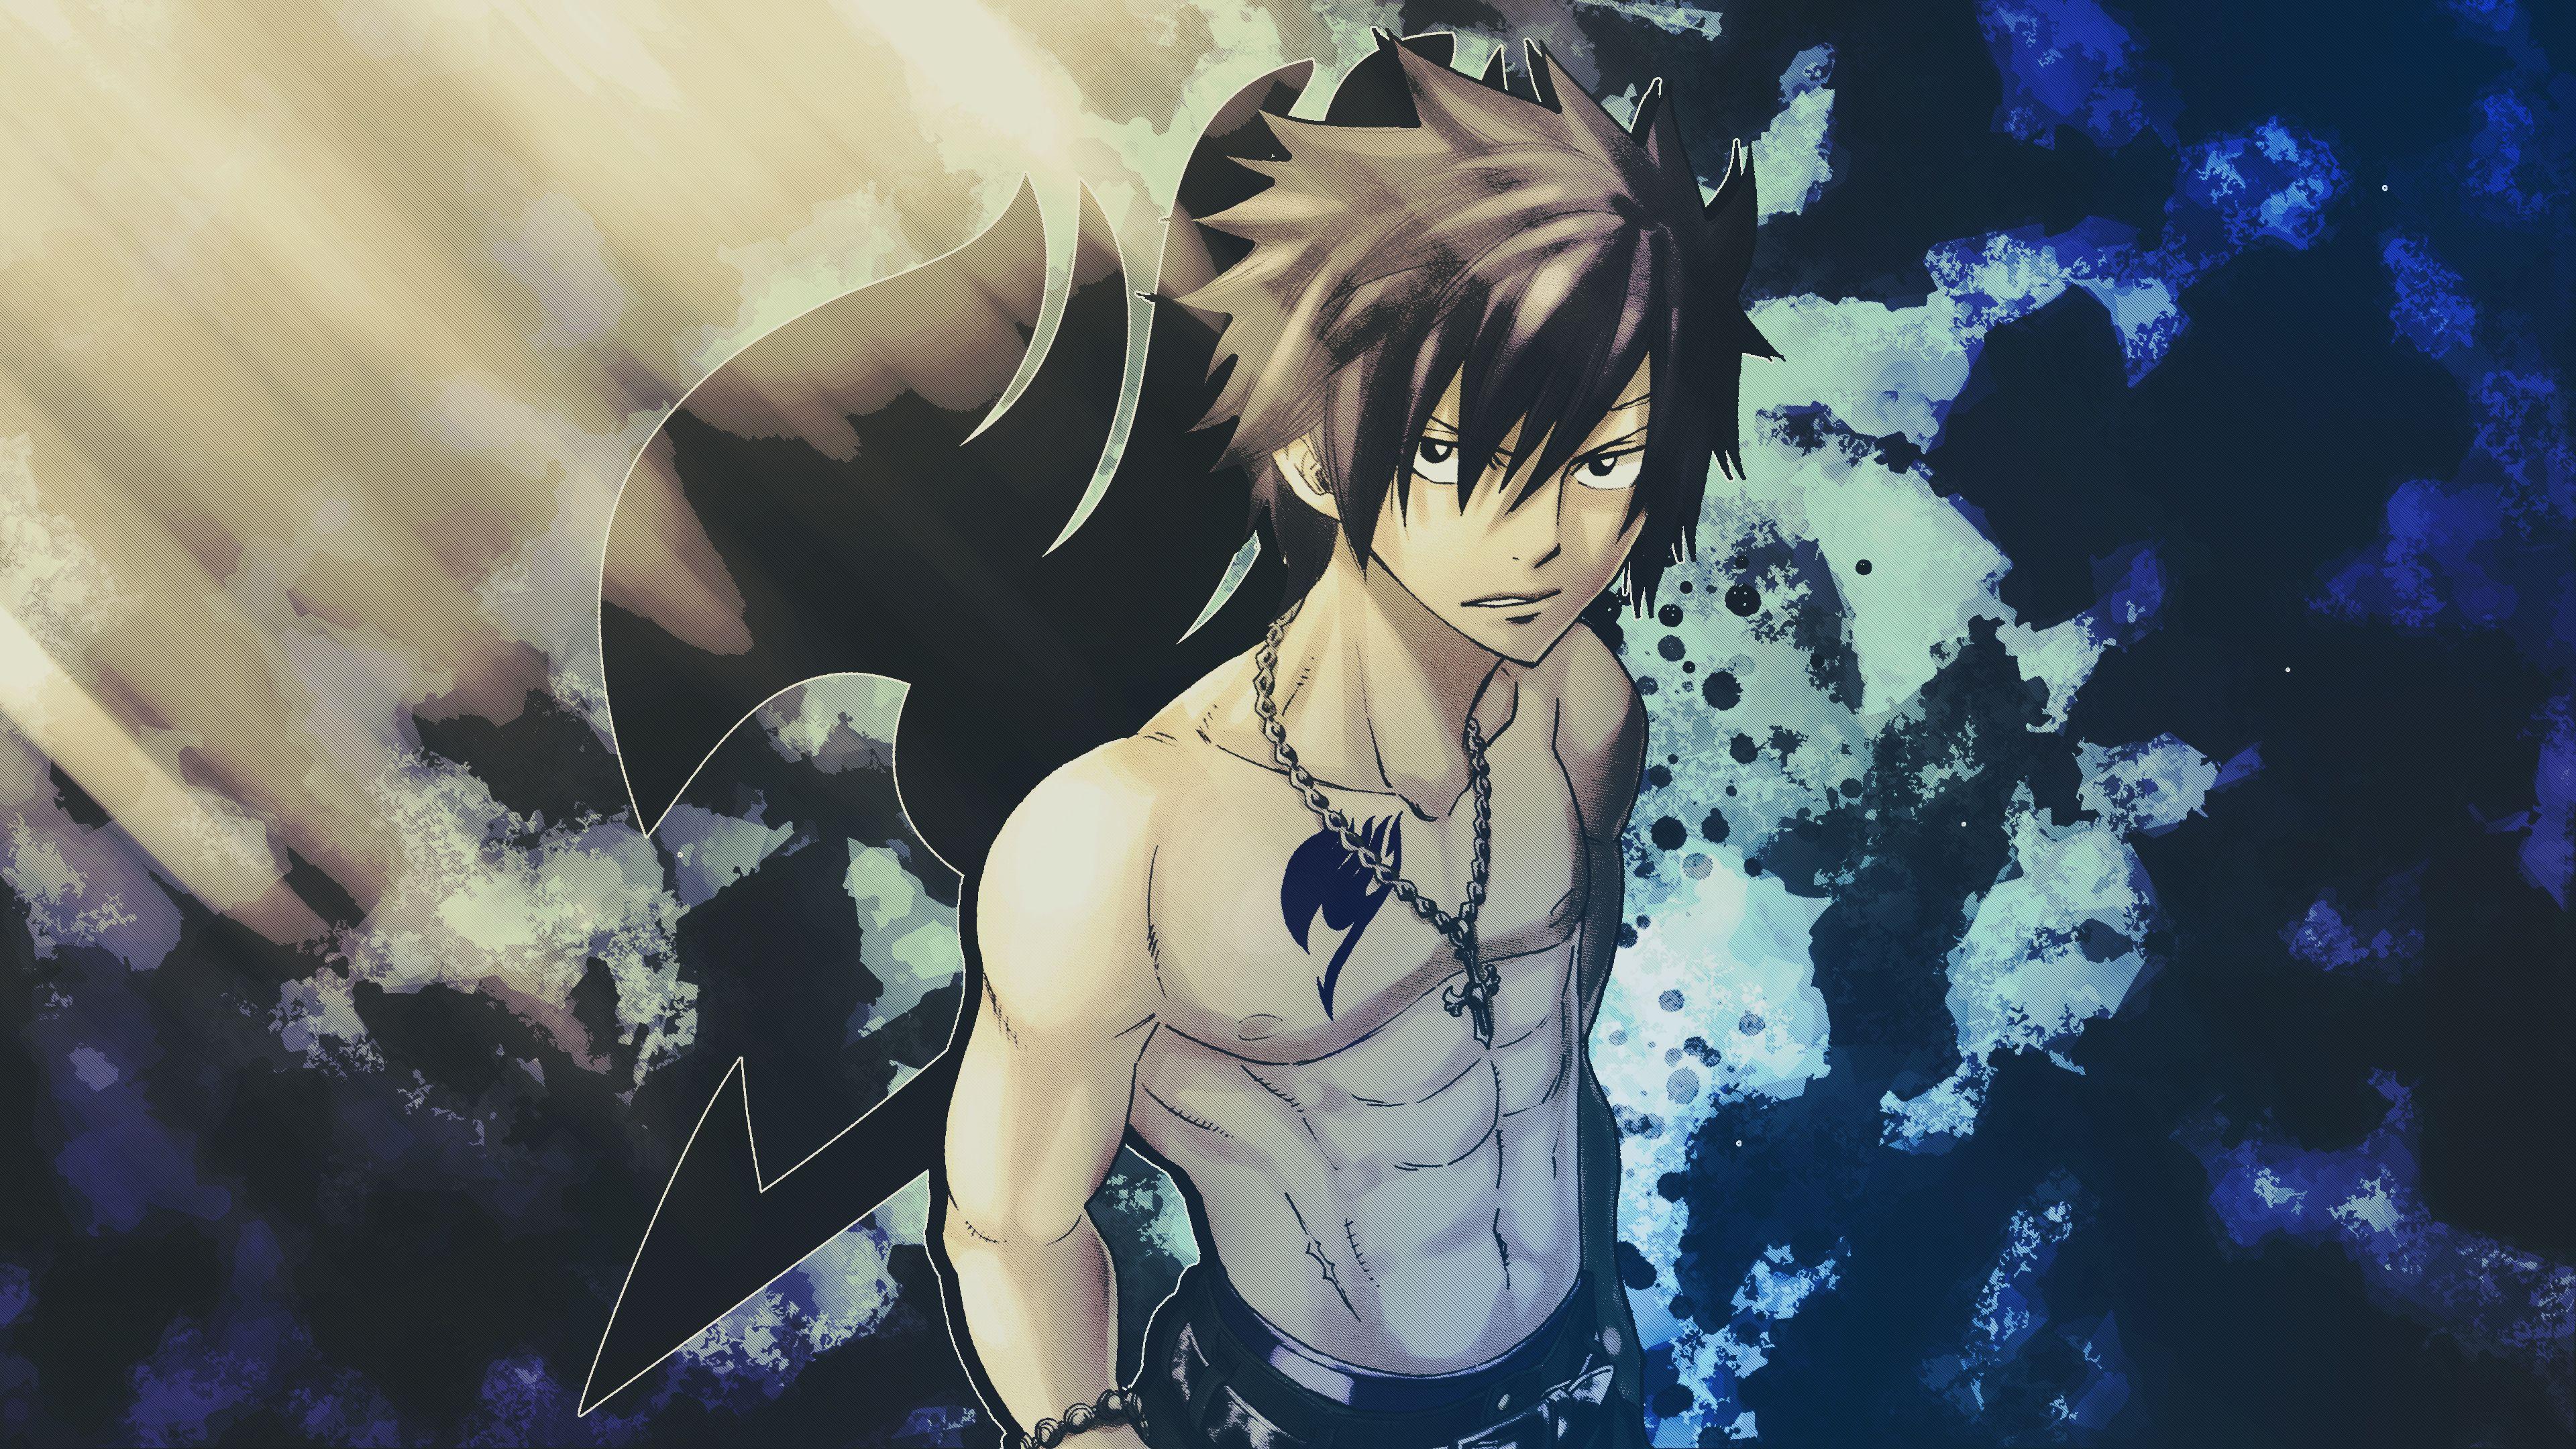 Fairy Tail 4k Ultra HD Wallpaper and Background Imagex2160